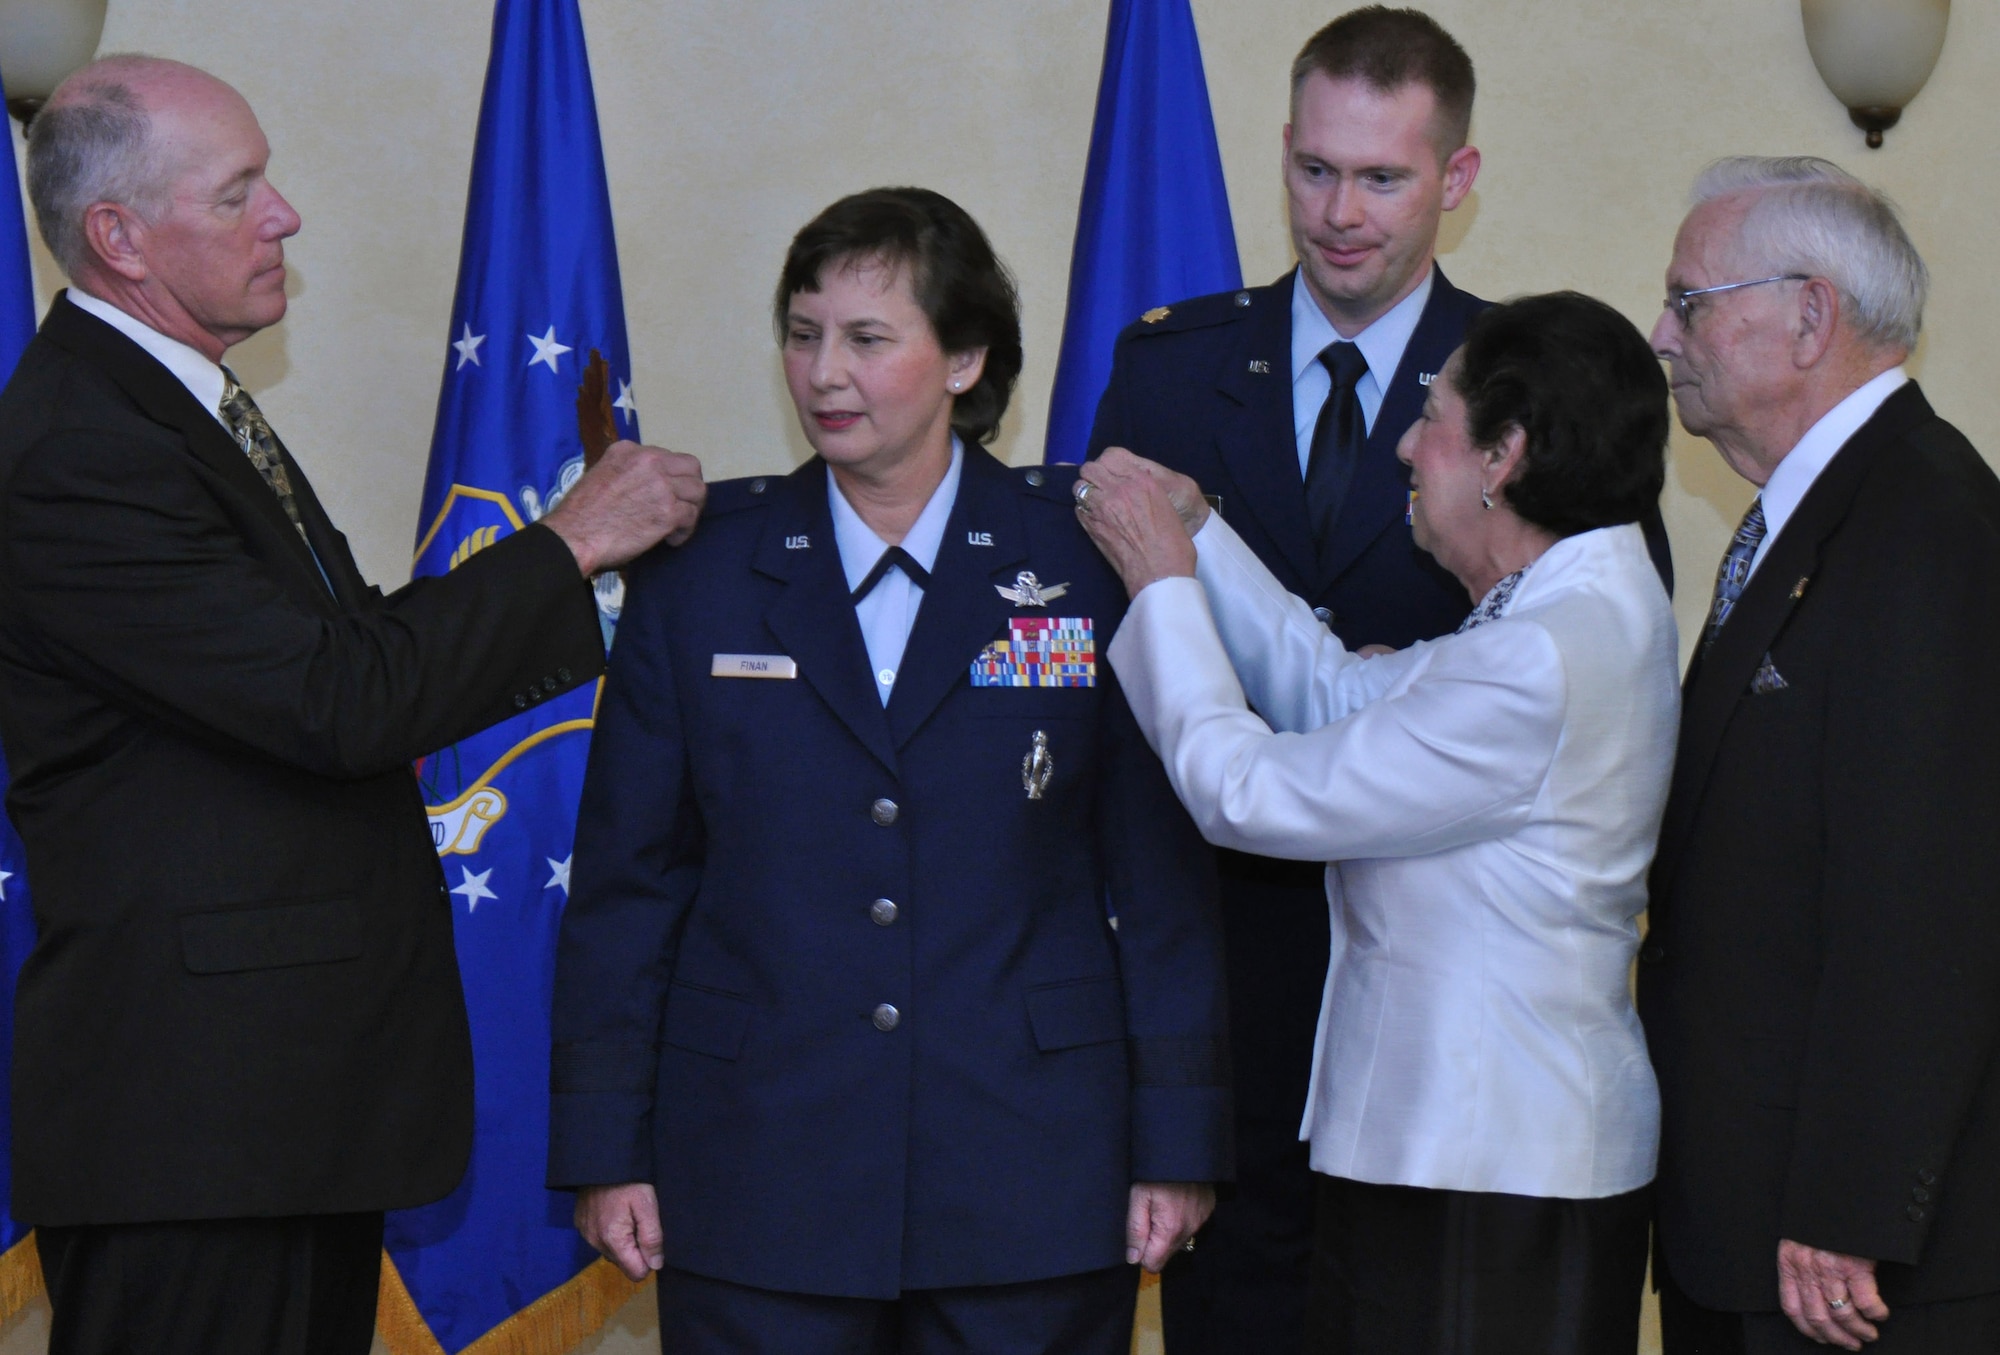 BARKSDALE AIR FORCE BASE, La. –Brig. Gen. Sandra Finan’s husband, Col. (ret) Chuck Finan (left), and her parents, Mrs. Margaret Chase and Mr. Delmar Chase, pin on her handmade brigadier general’s stars at her promotion ceremony June 15 at the Barksdale Club, as proffer Maj. Jonathan Davis looks on.  General Finan is the Air Force Global Strike Command Inspector General . (U.S. Air Force photo/Master Sgt. Corey Clements)